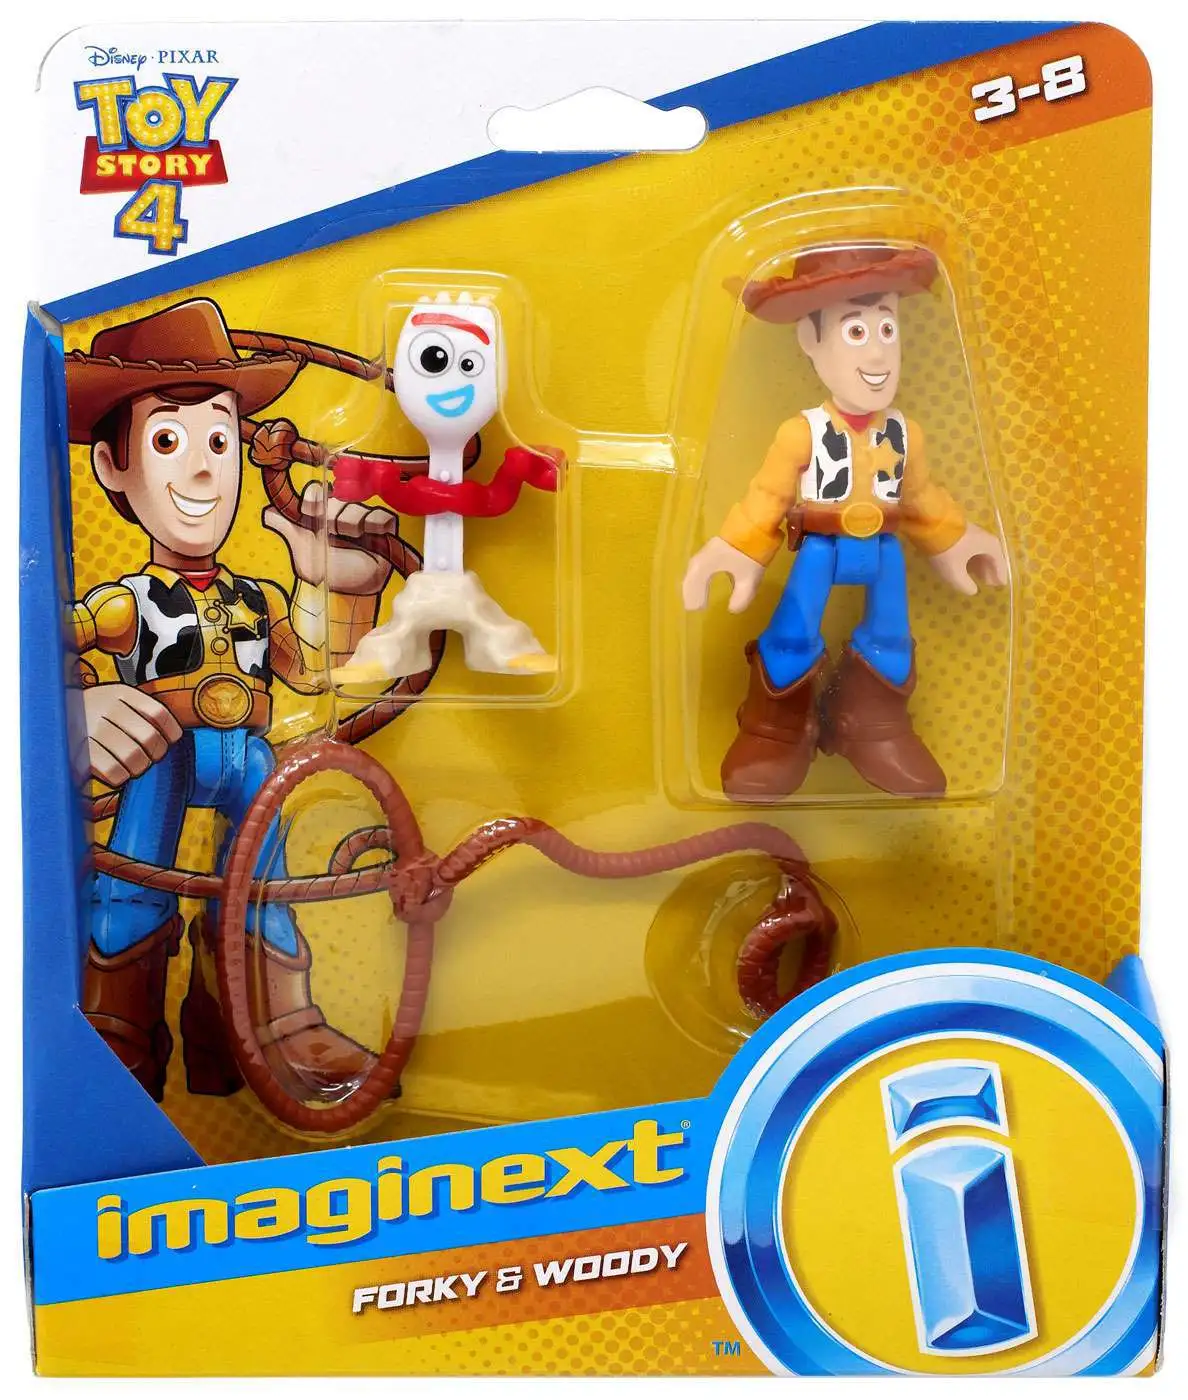 Combat Carl & Bo Peep Details about   Imaginex Toy Story 4 NEW 